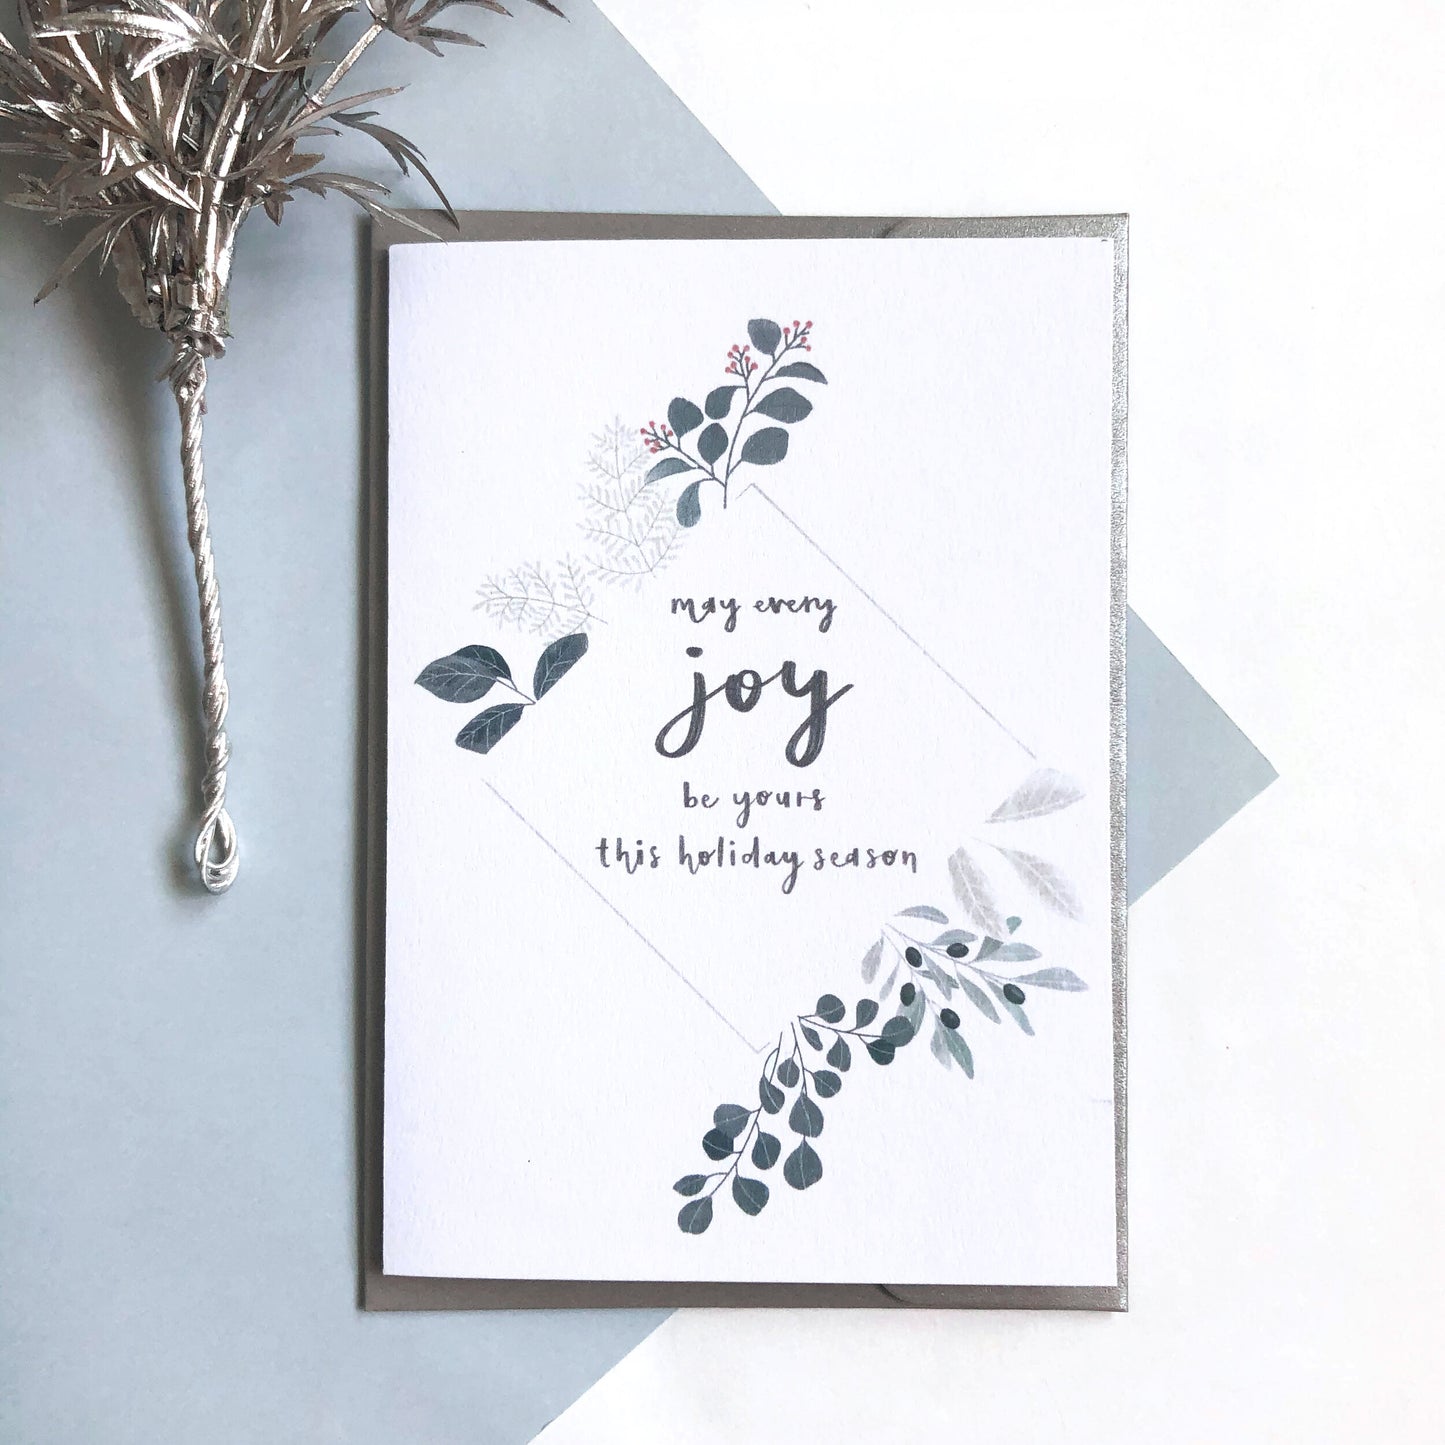 May Every Joy be Yours | Greeting Card